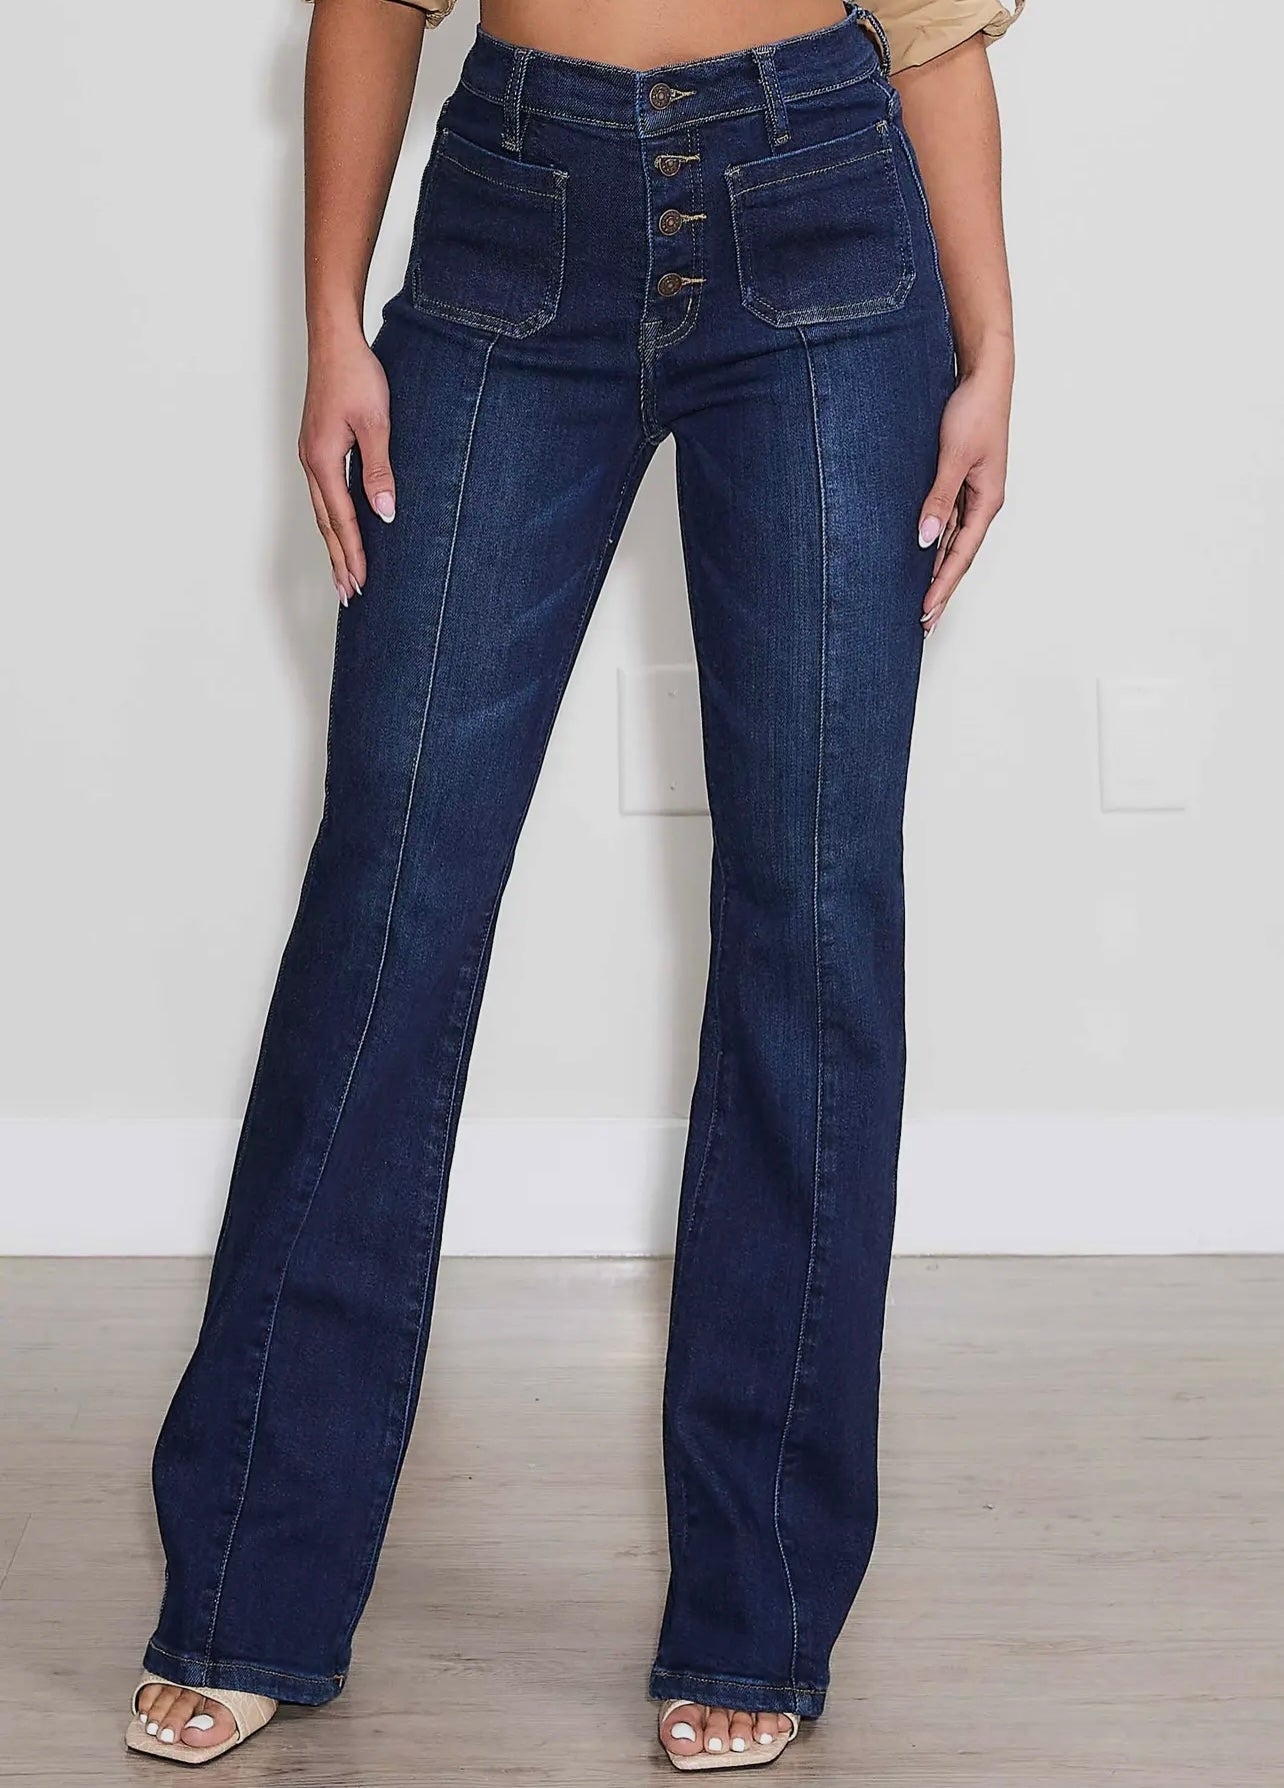 4 Buttons Square Pocket Bootcut Jeans